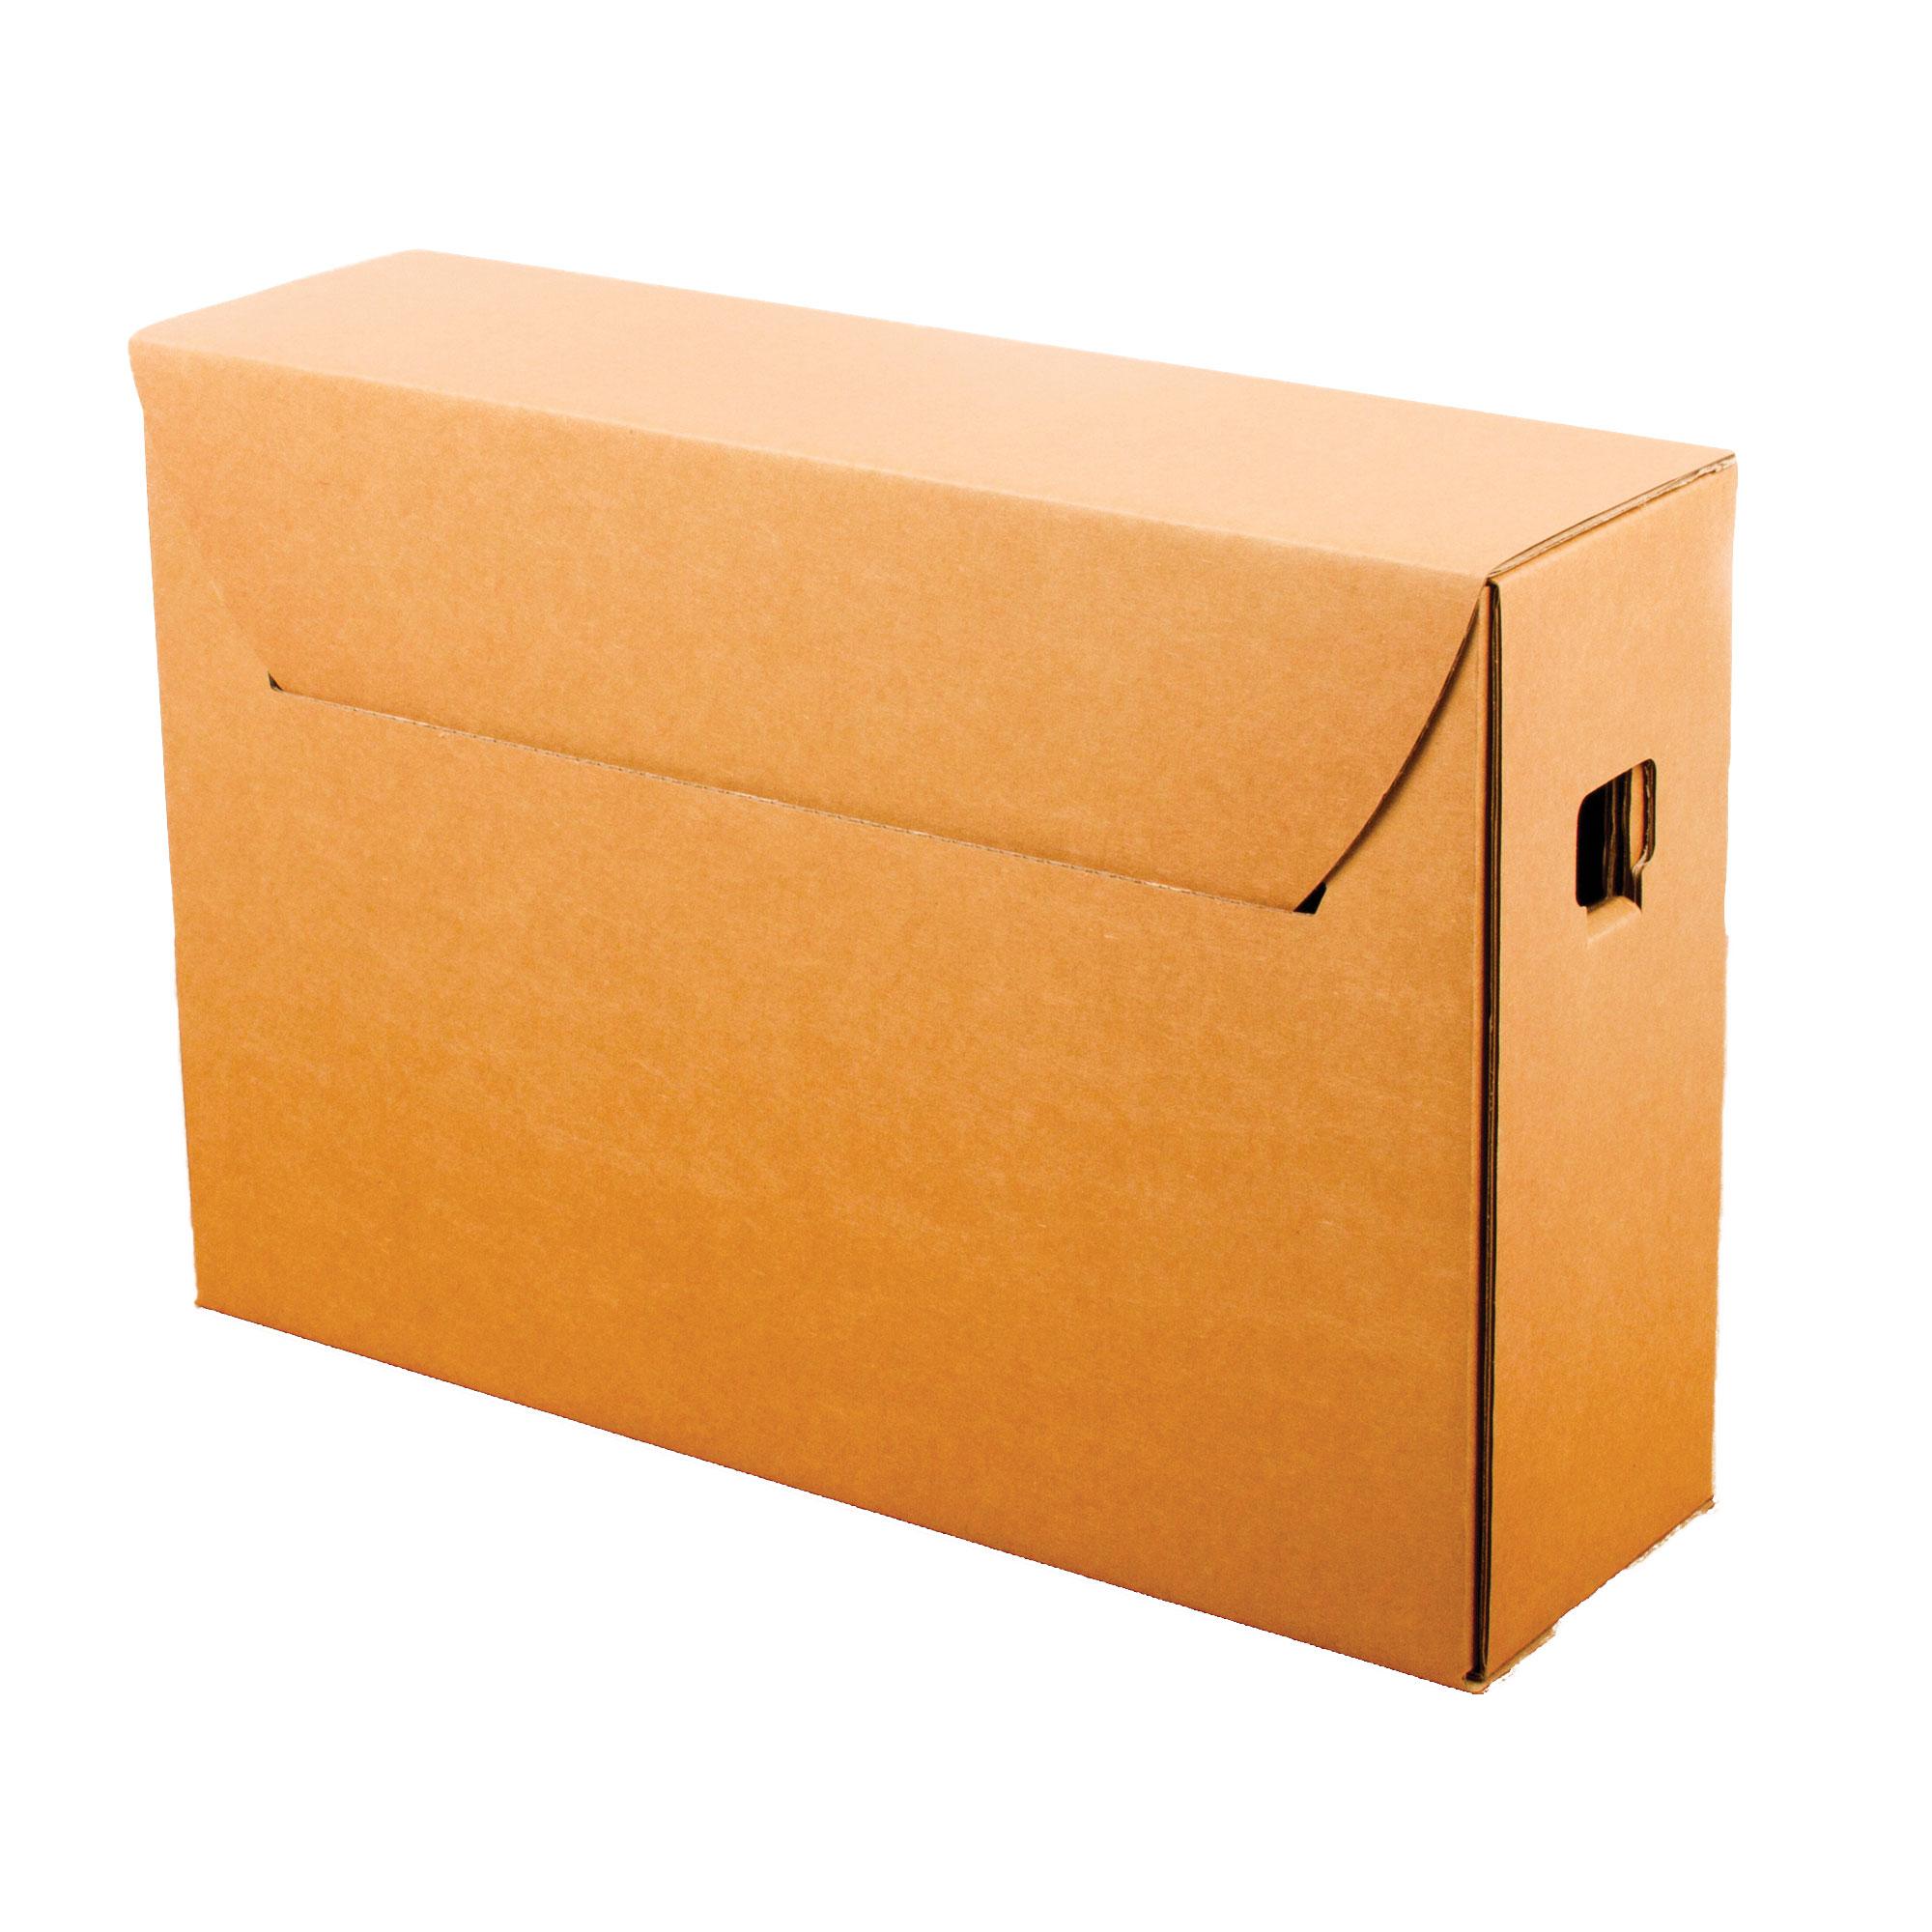 Corrugated Archival Storage Boxes 435x320x60mm - Pack of 1